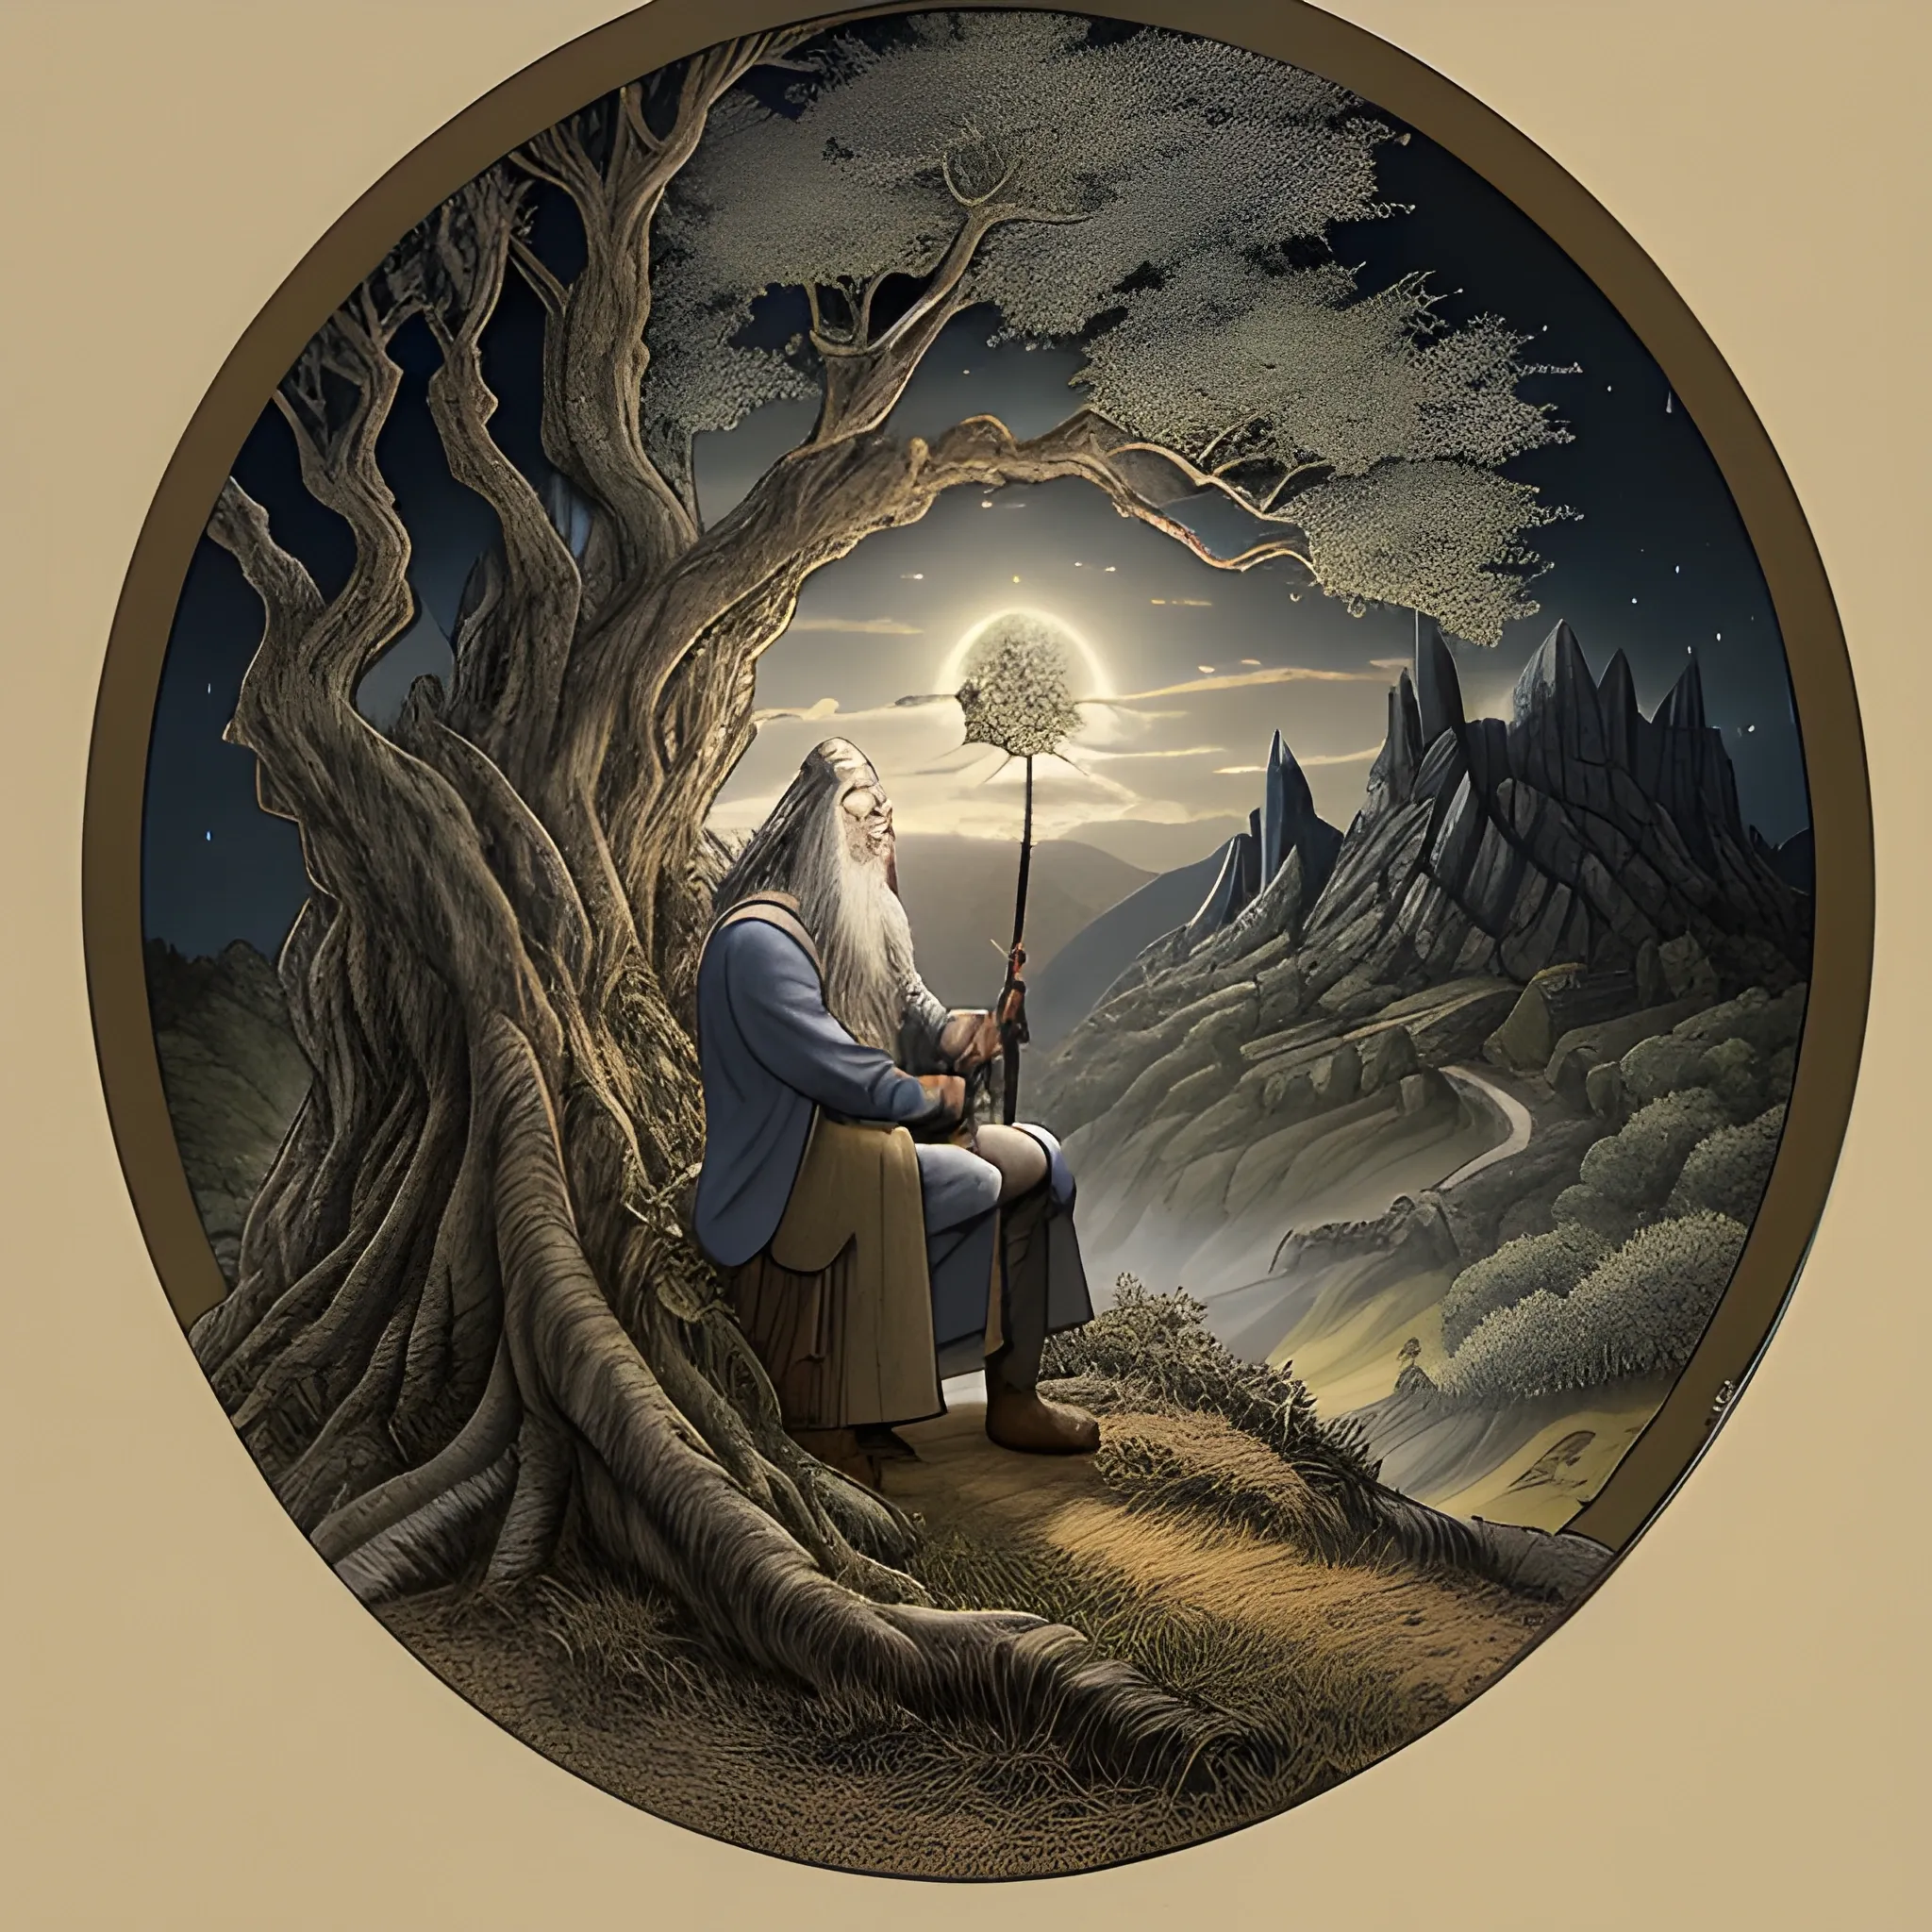 Gandalf standing on the left of frame against an old gnarled tree on a hill looking at the shire at night. He is smoking a pipe as he looks down on the warmly lit hobbit holes in the distance. 